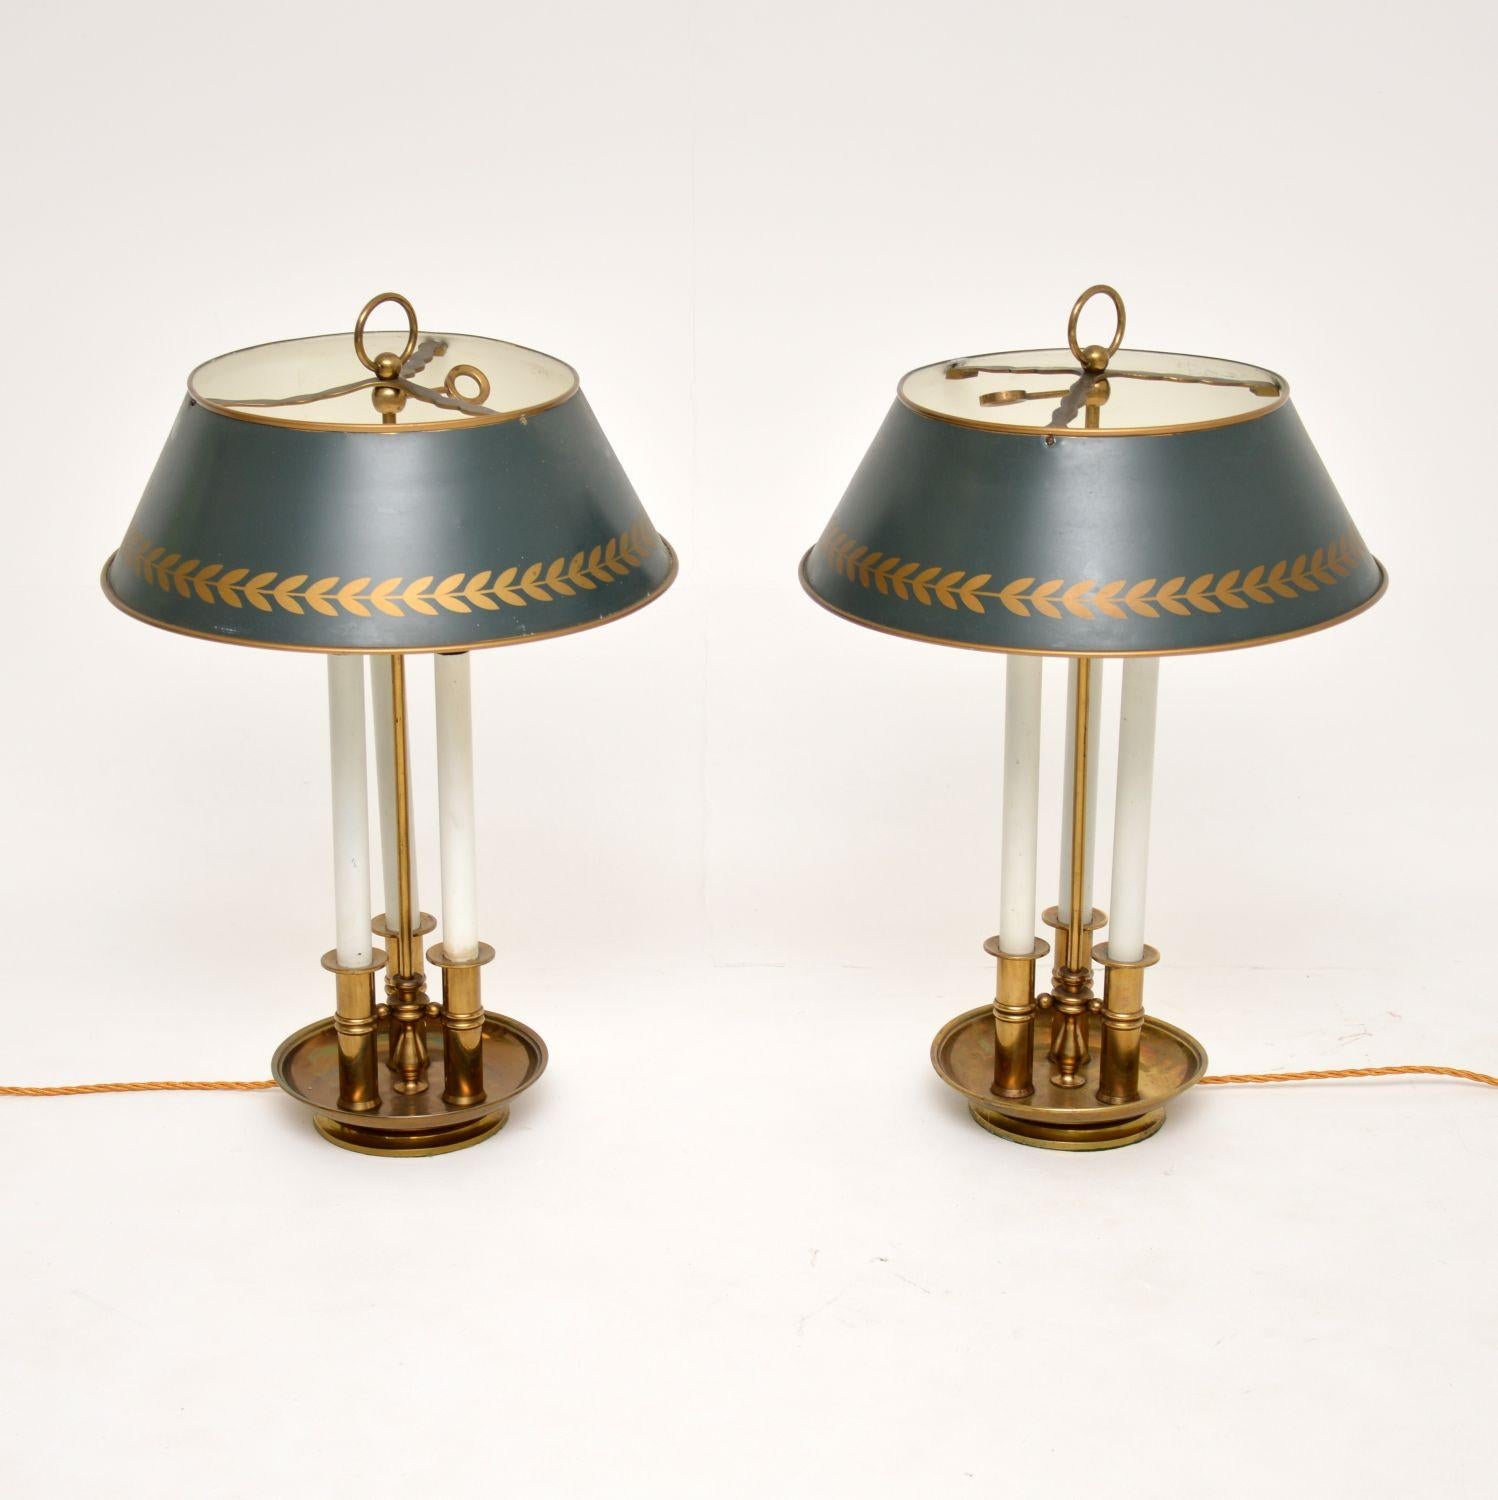 A superb pair of antique table lamps in brass with beautiful tole shades. They were made in England, and date from around the 1920-30’s.

The quality is outstanding, they have a gorgeous design and are a very impressive size.

The solid brass